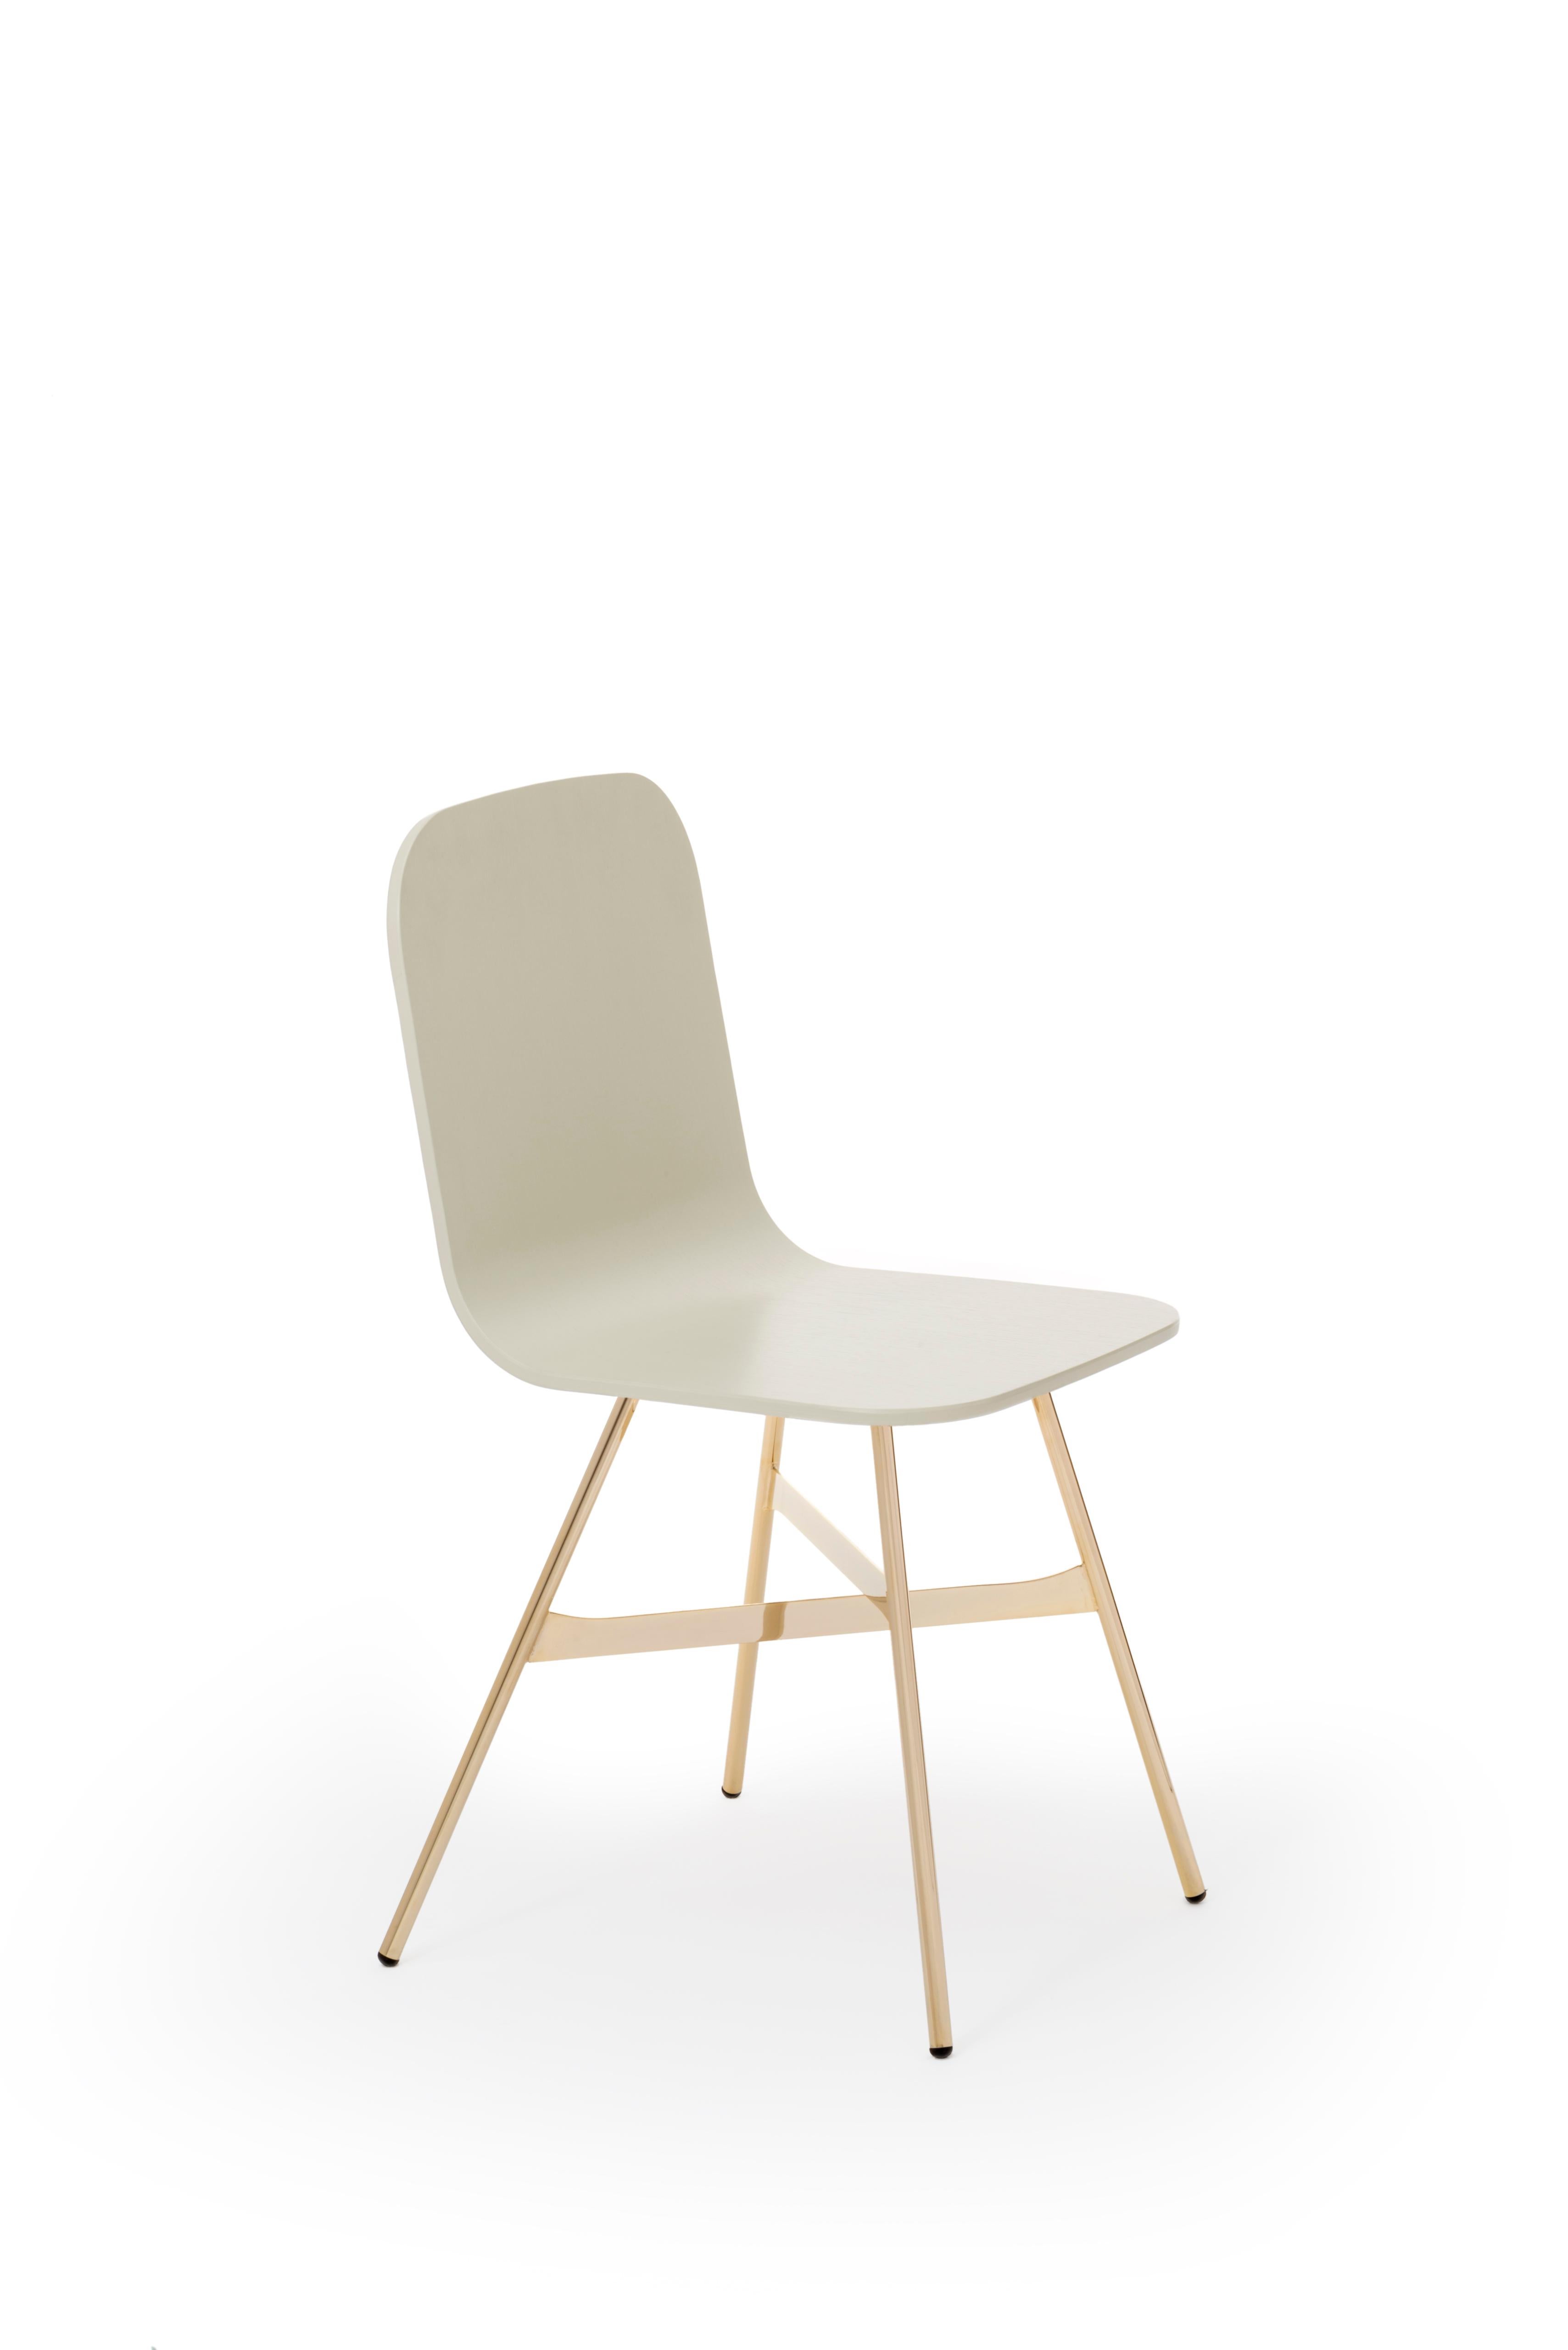 Paint Tria Simple Chair, Golden Legs, Minimalist Design Icon Inspired to Graphic Art For Sale